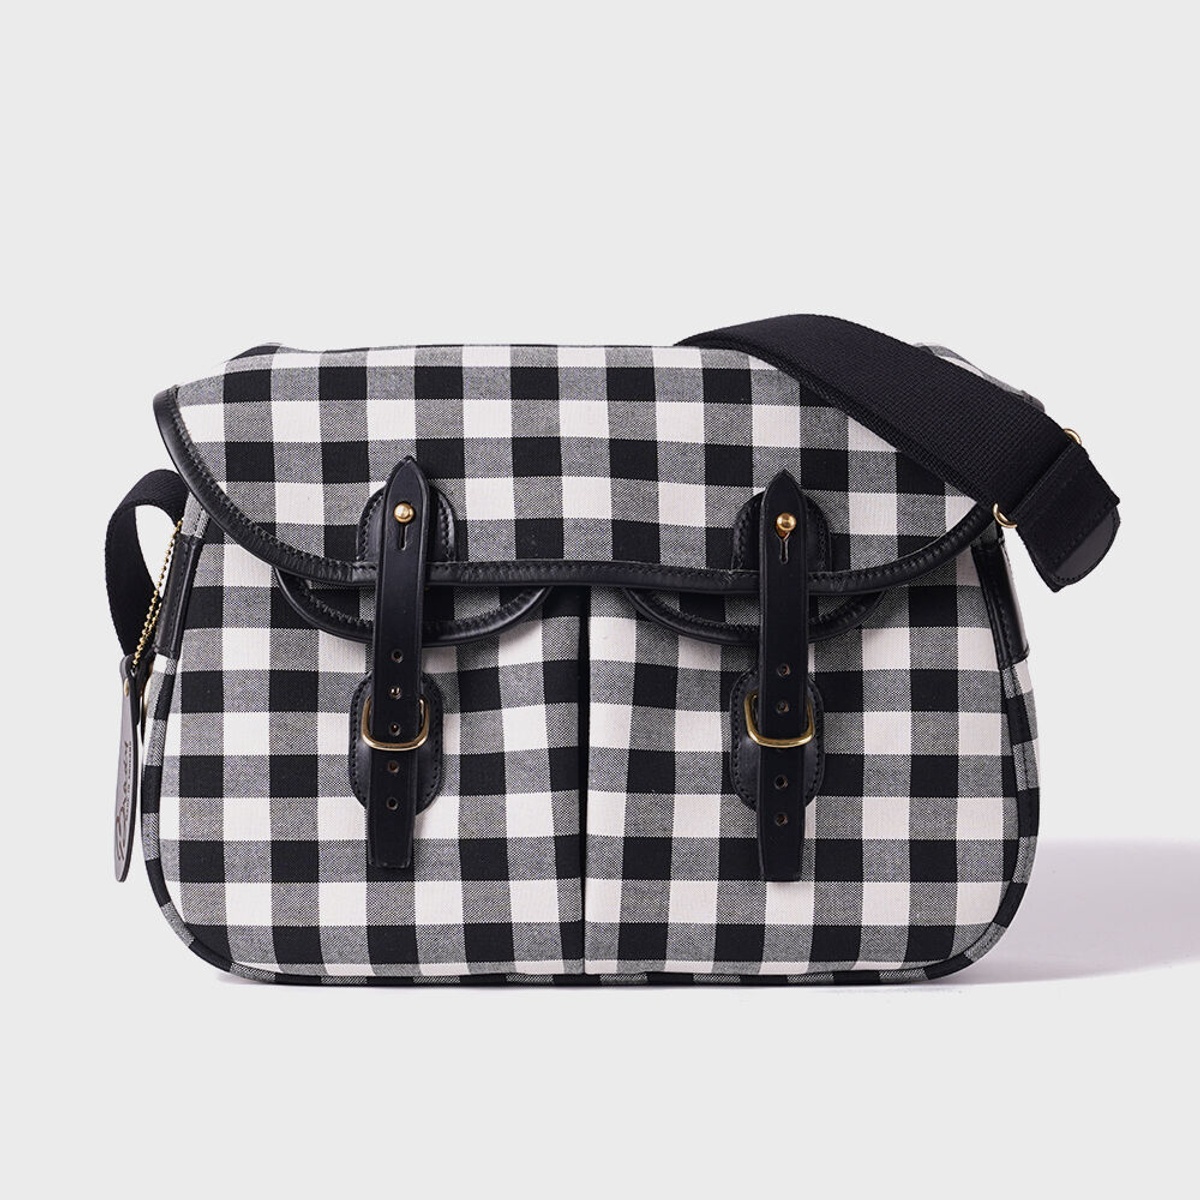 ARIEL TROUT Fishing Bag Small / Large Gingham - 감도 깊은 취향